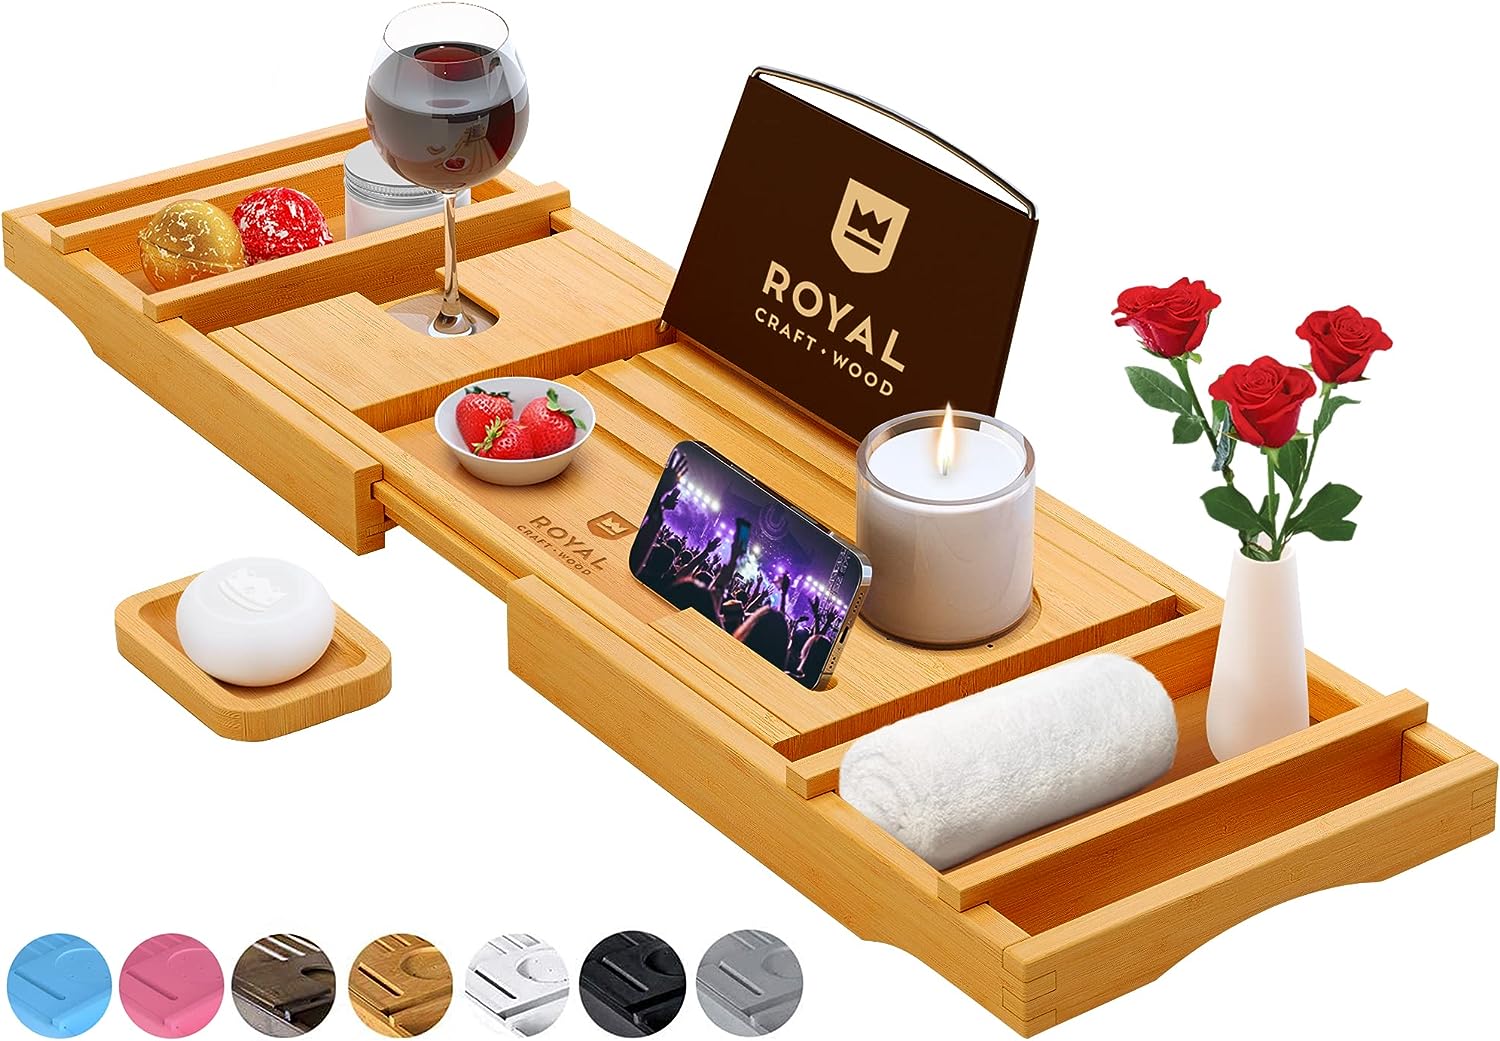 ROYAL CRAFT WOOD Luxury Bathtub Caddy Tray, One or Two Person Bath and Bed Tray, Bonus Free Soap Holder (Natural Bamboo Color) - image 1 of 10